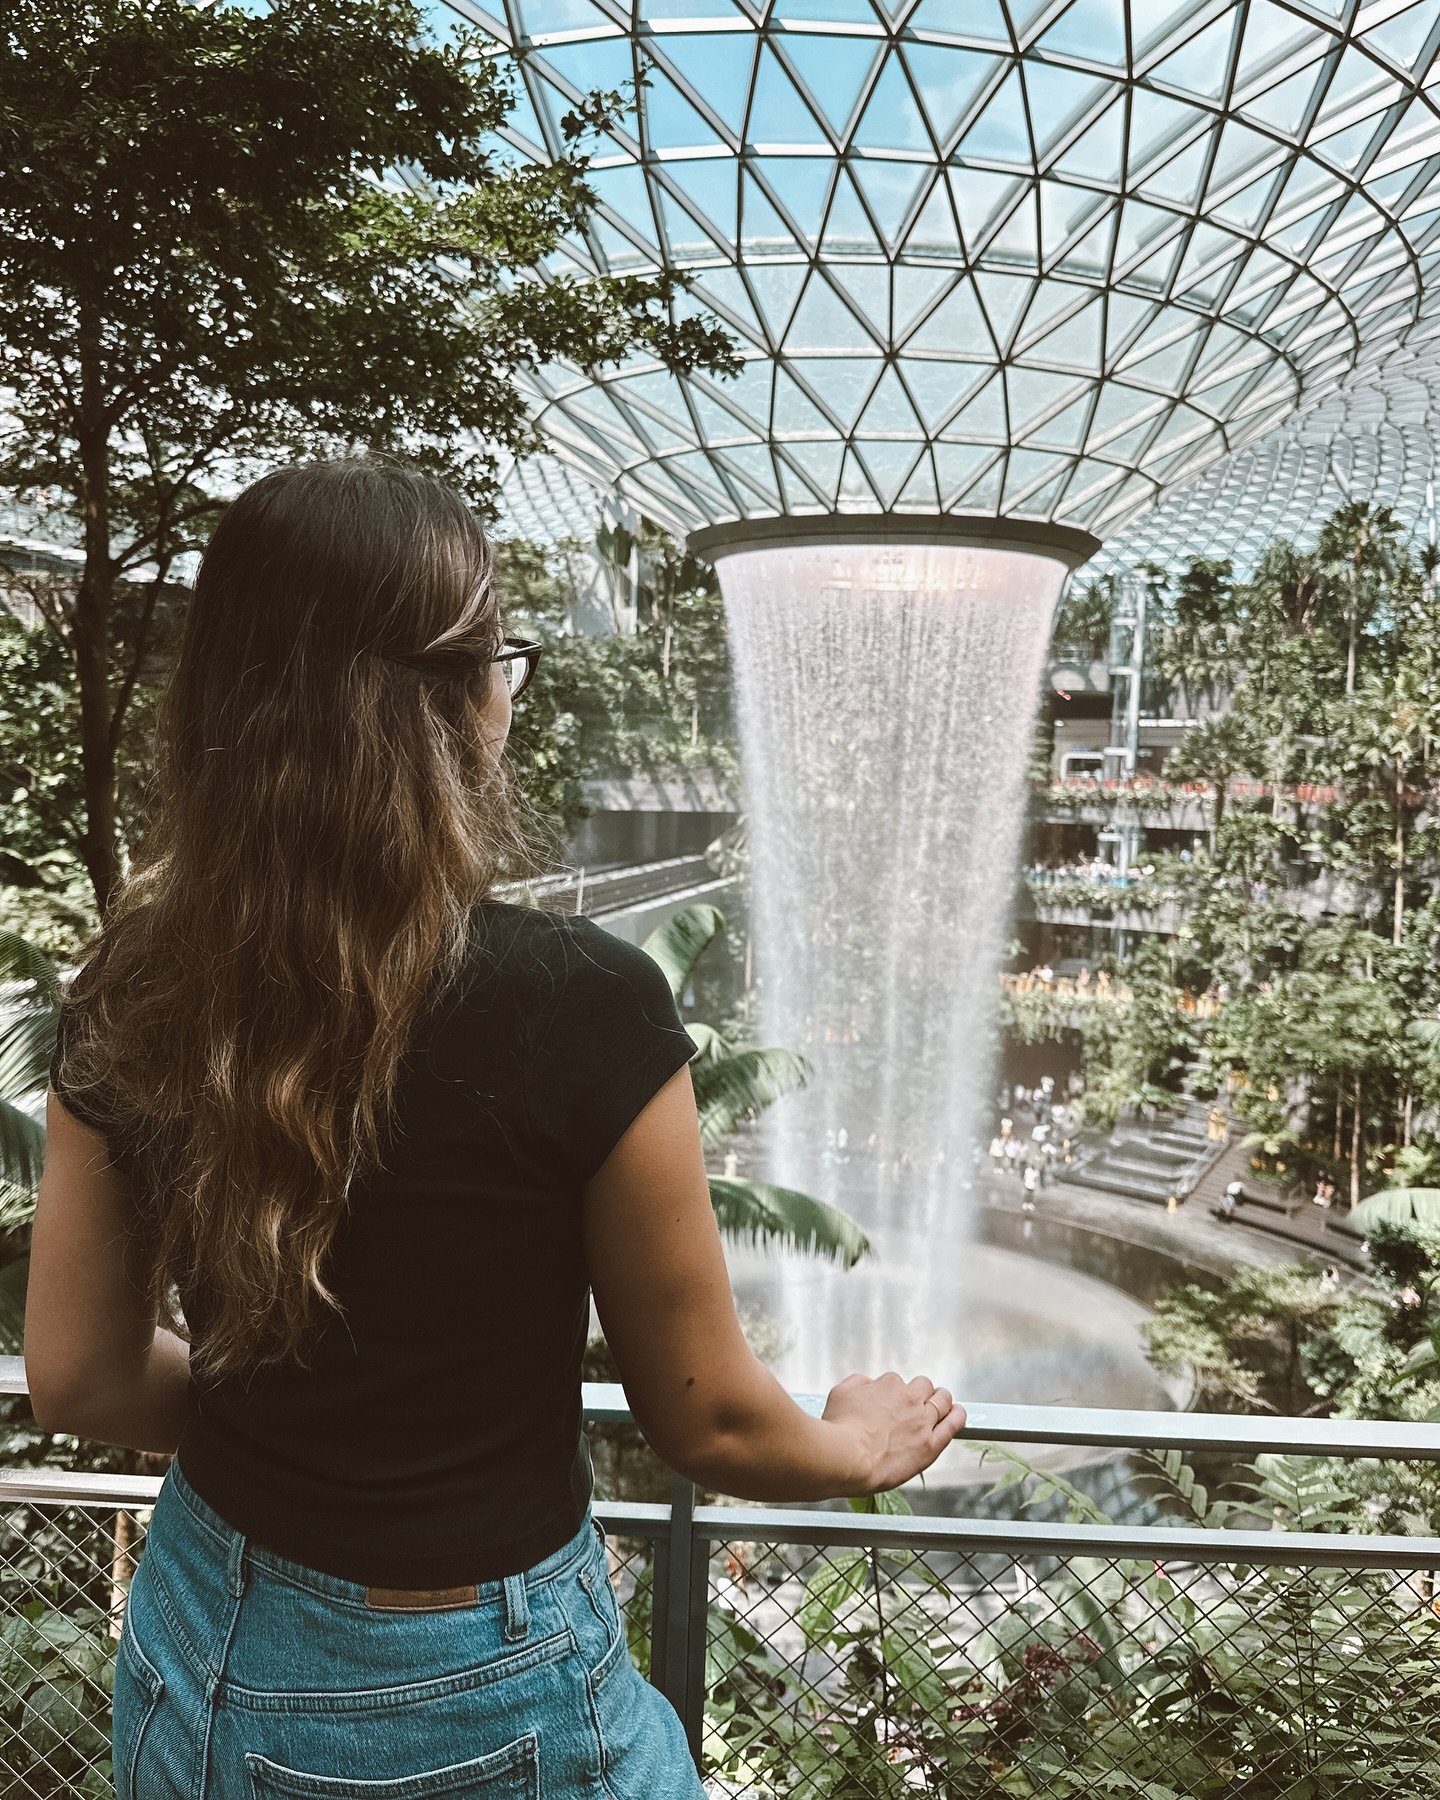 🧳 Just touched down in the Singapore airport with @kylefcords! Home of indoor waterfalls and ✨ $22 Shake Shack Burgers ✨

#digitalnomad #travel #singapore #writer